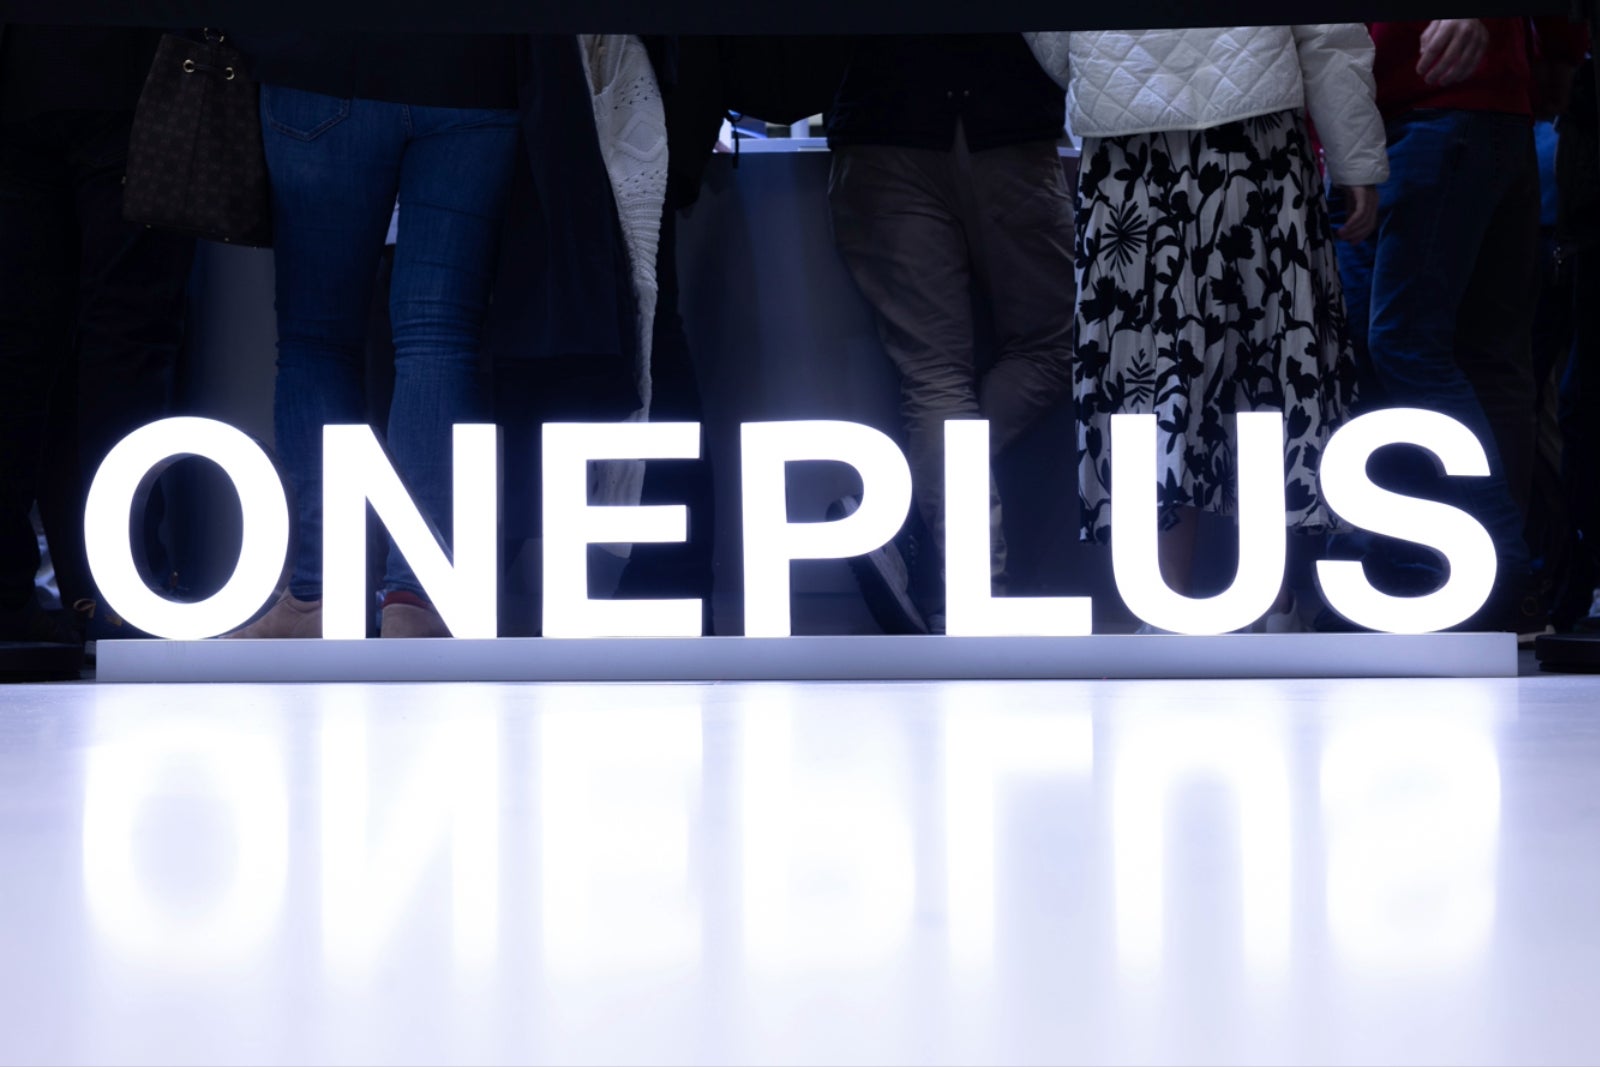 No shops, no sales? How could a OnePlus ban affect the company in India